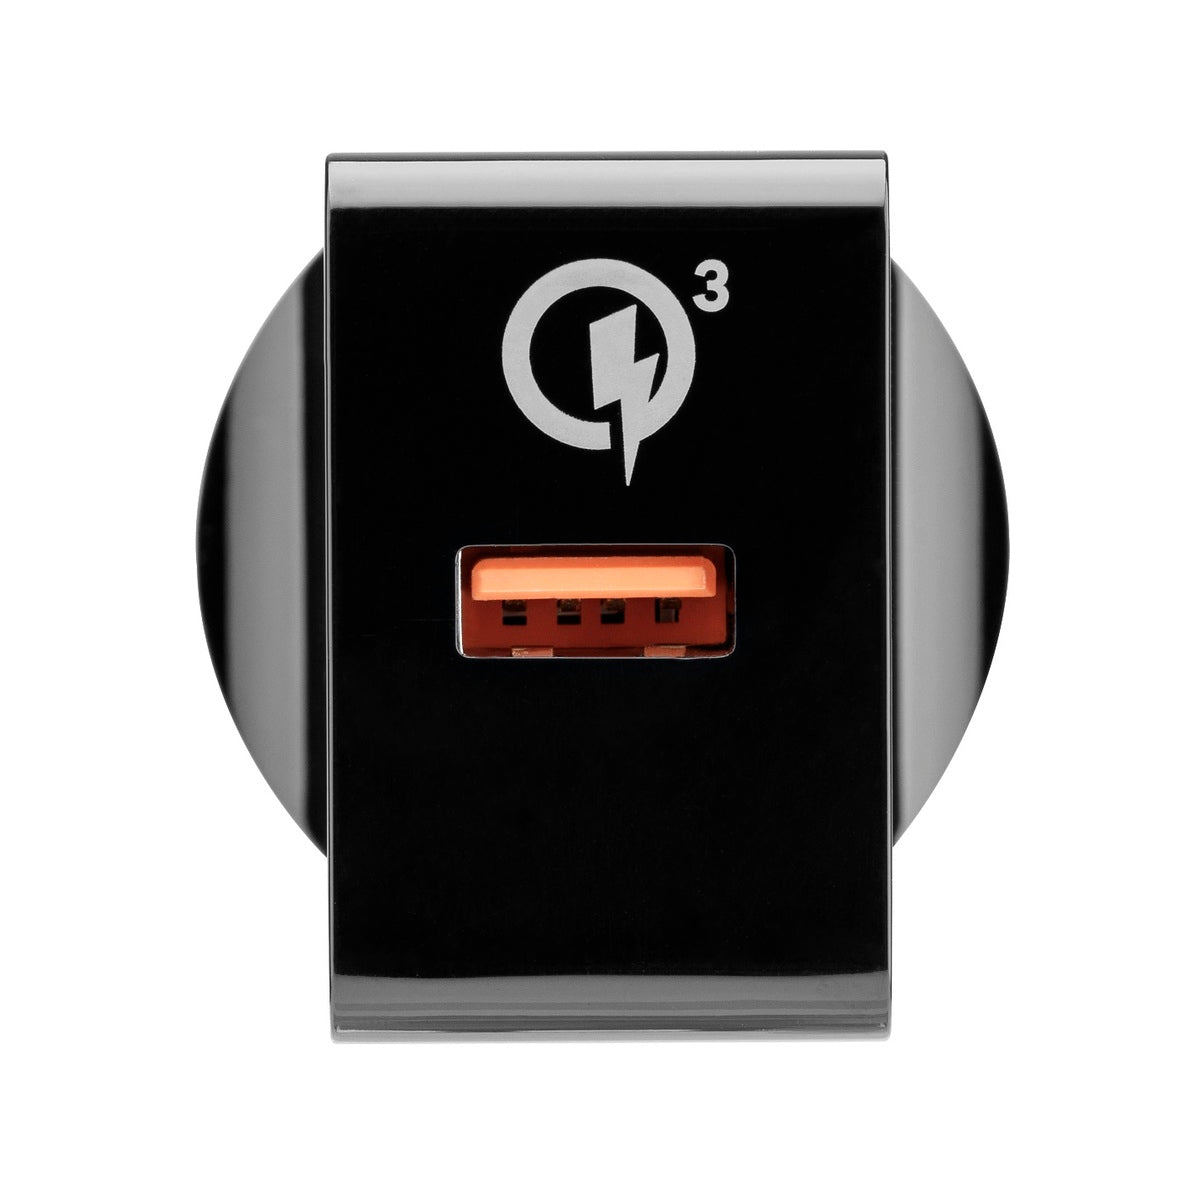 3sixT Qi Wireless Fast Charger+Wall Charger USB-A QC3 3A.